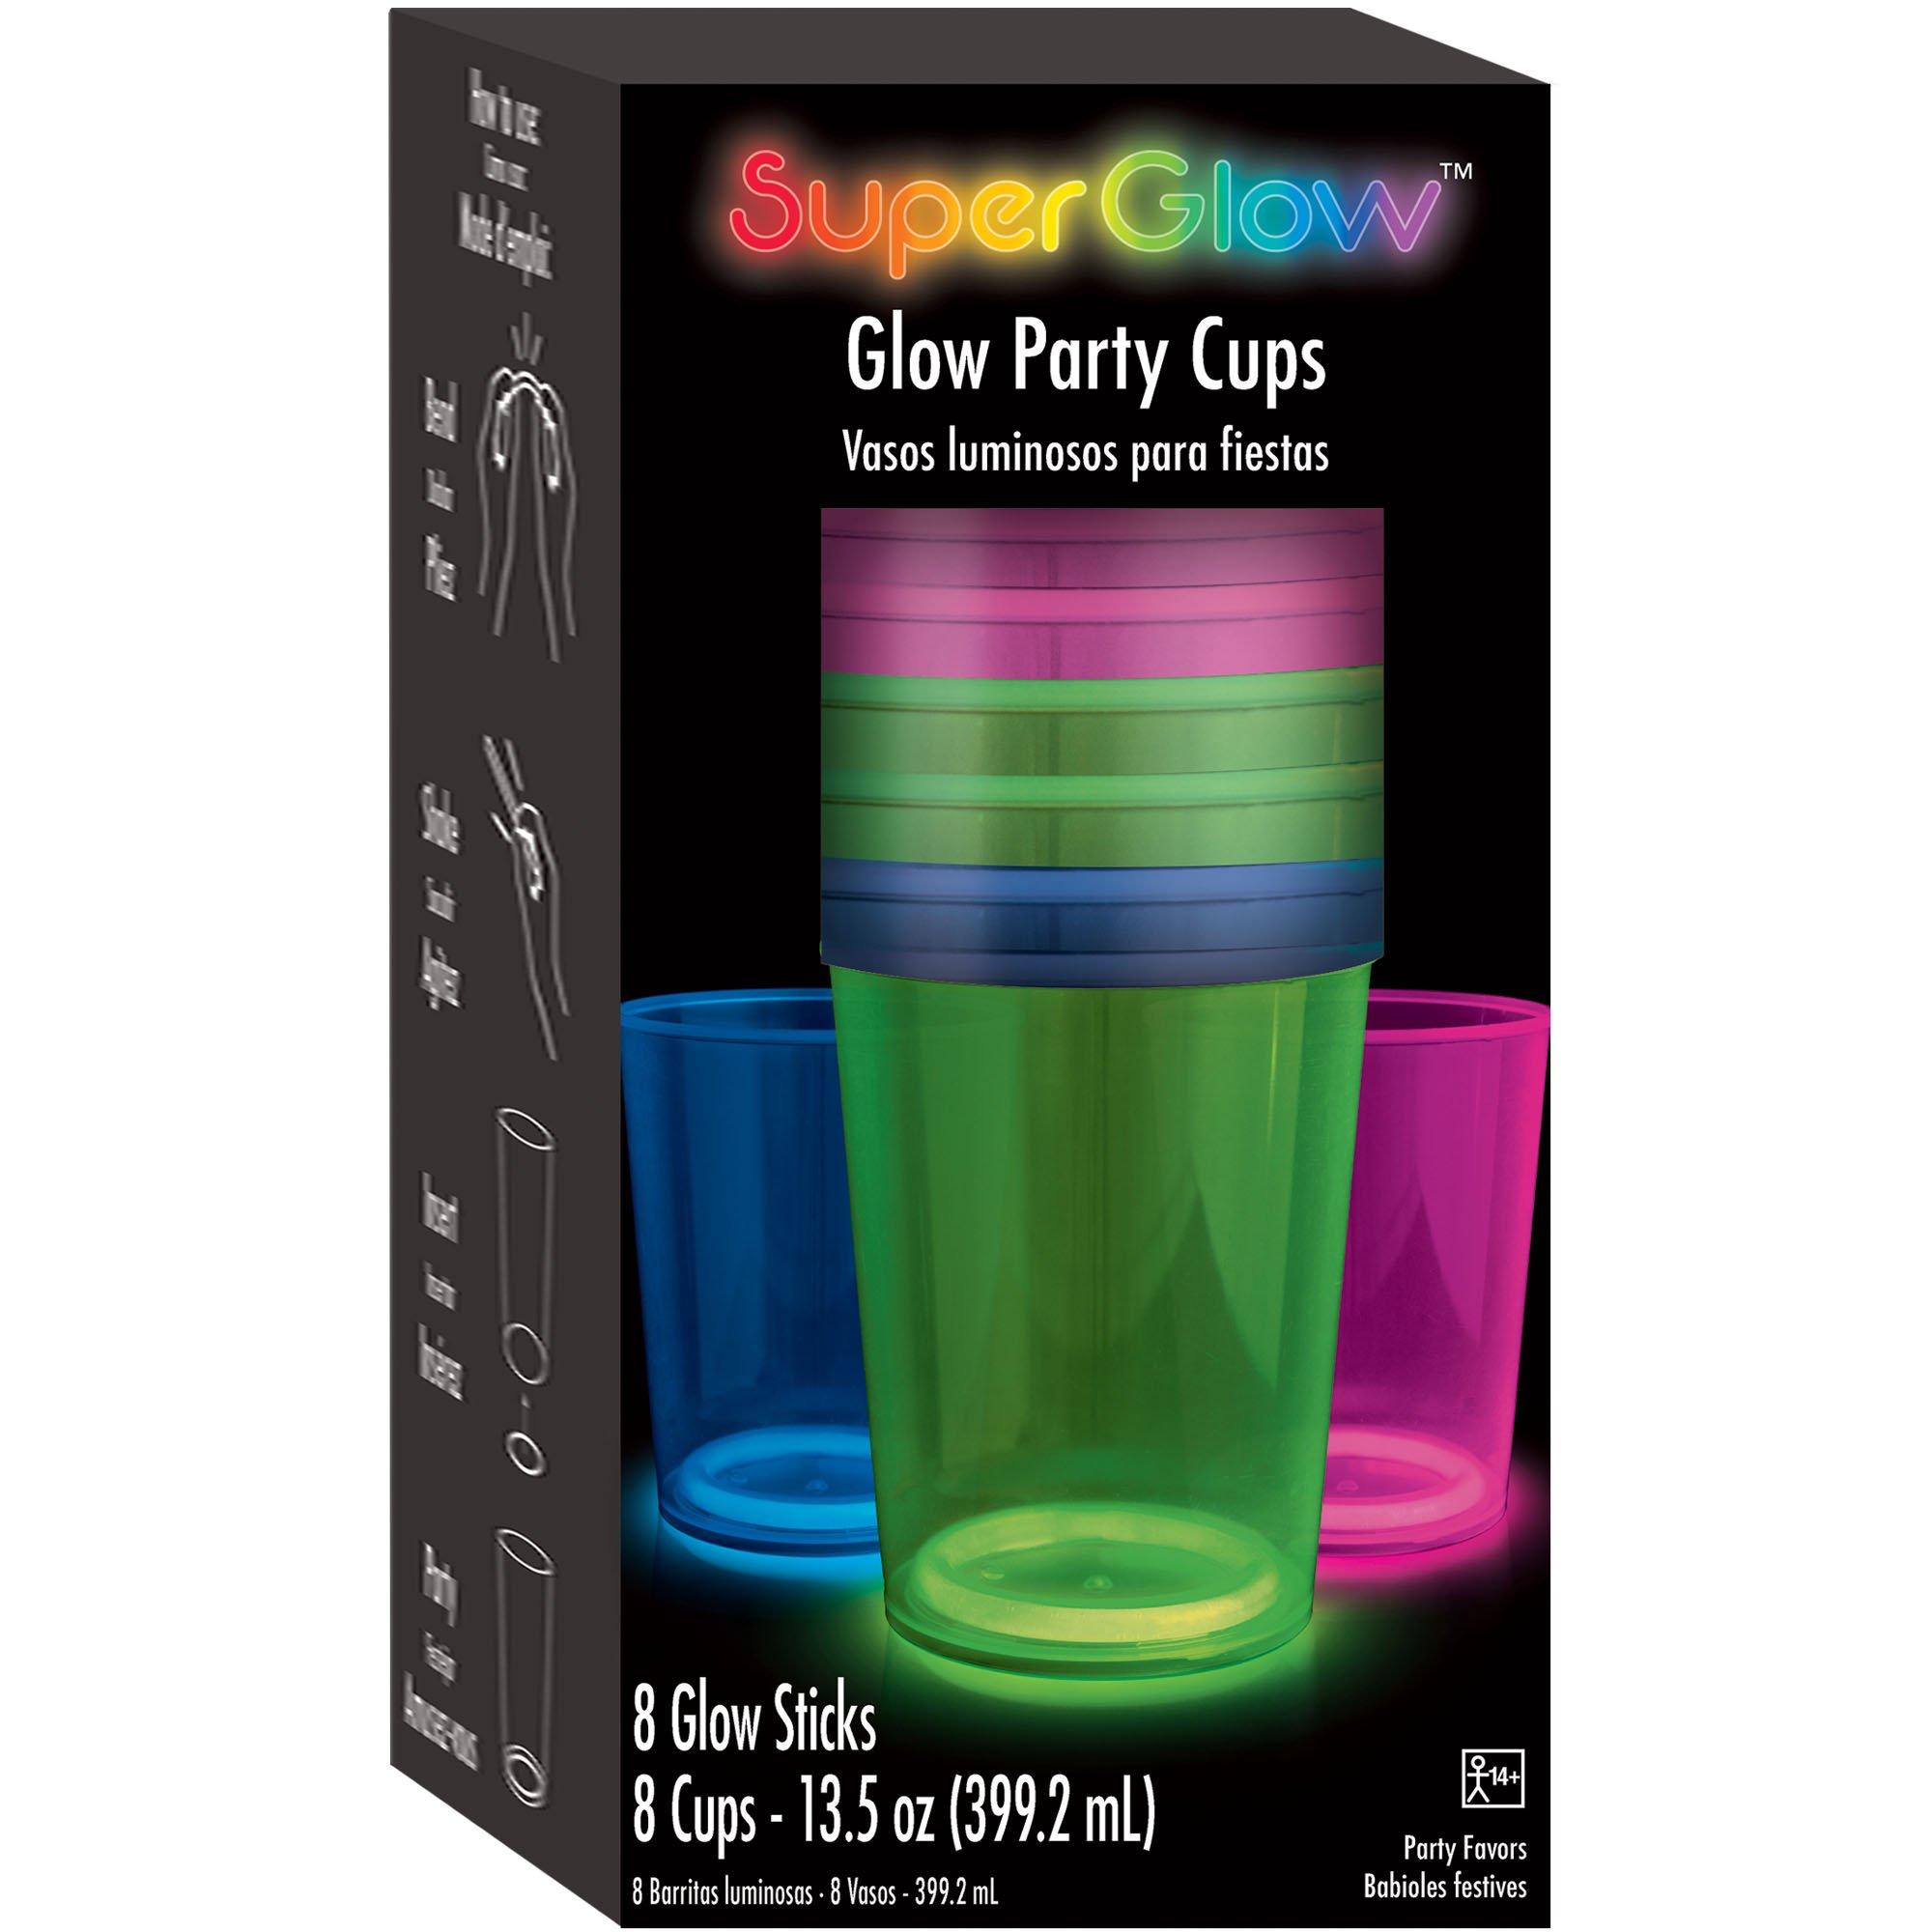 Glo Pro Glow Cups, 7 Colors - 20 cups